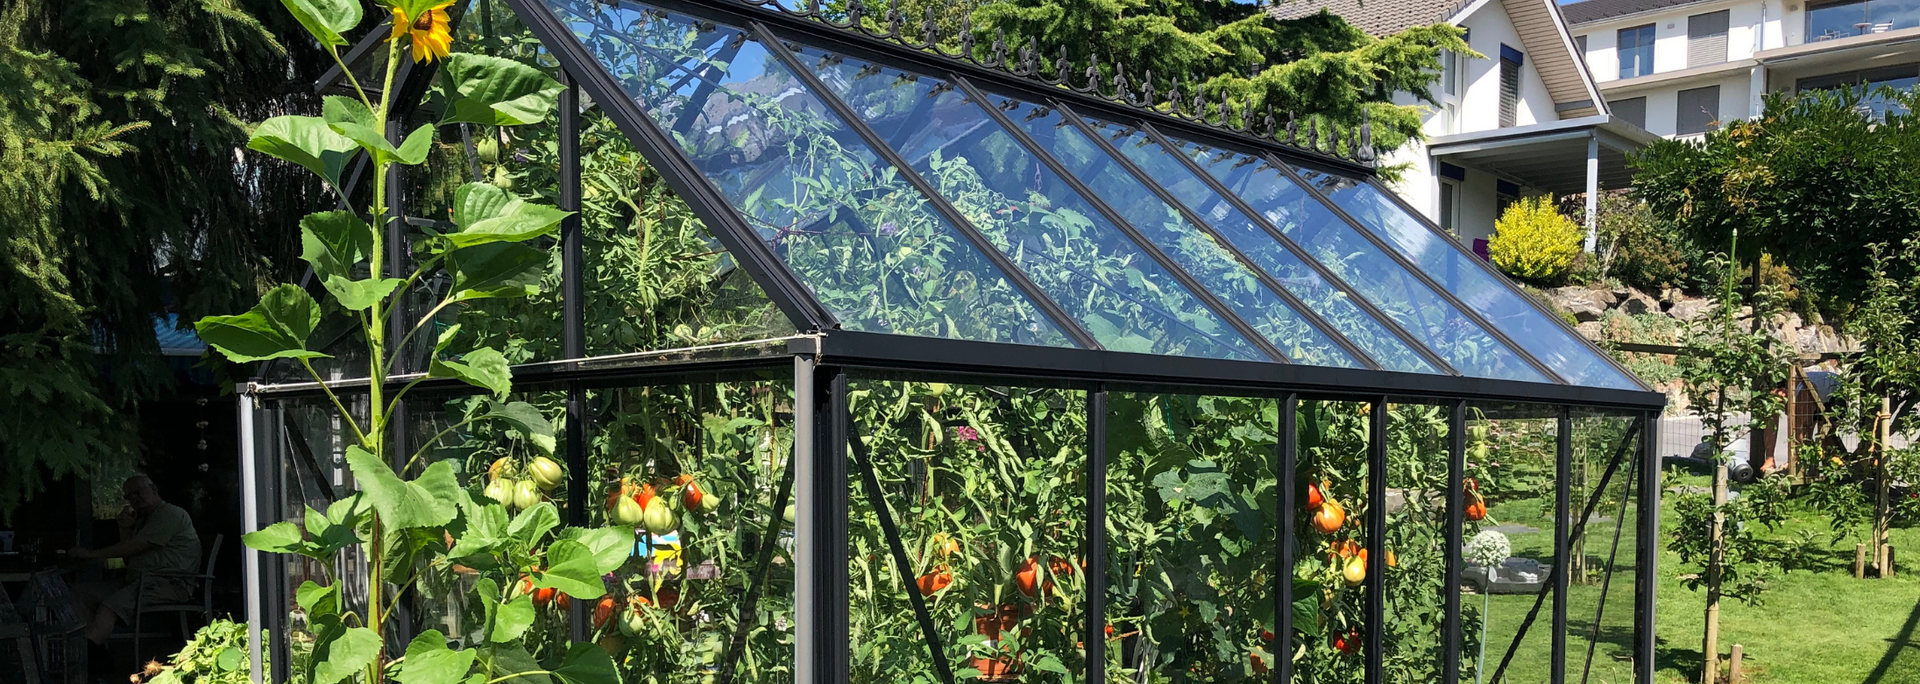 Picture of a greenhouse.